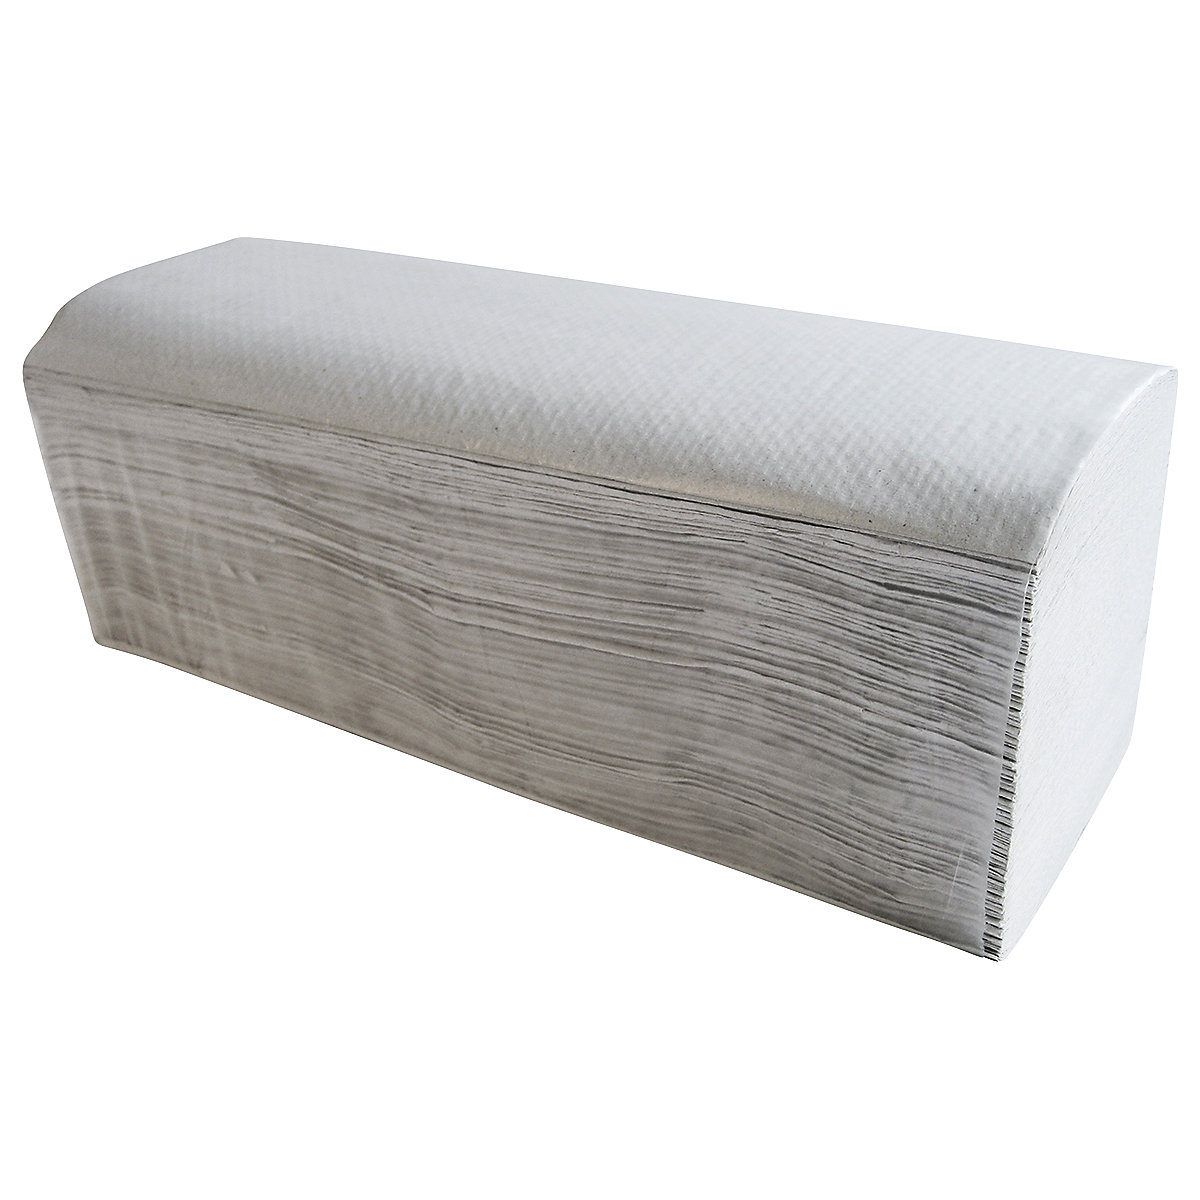 Recycled folded paper towels - CWS